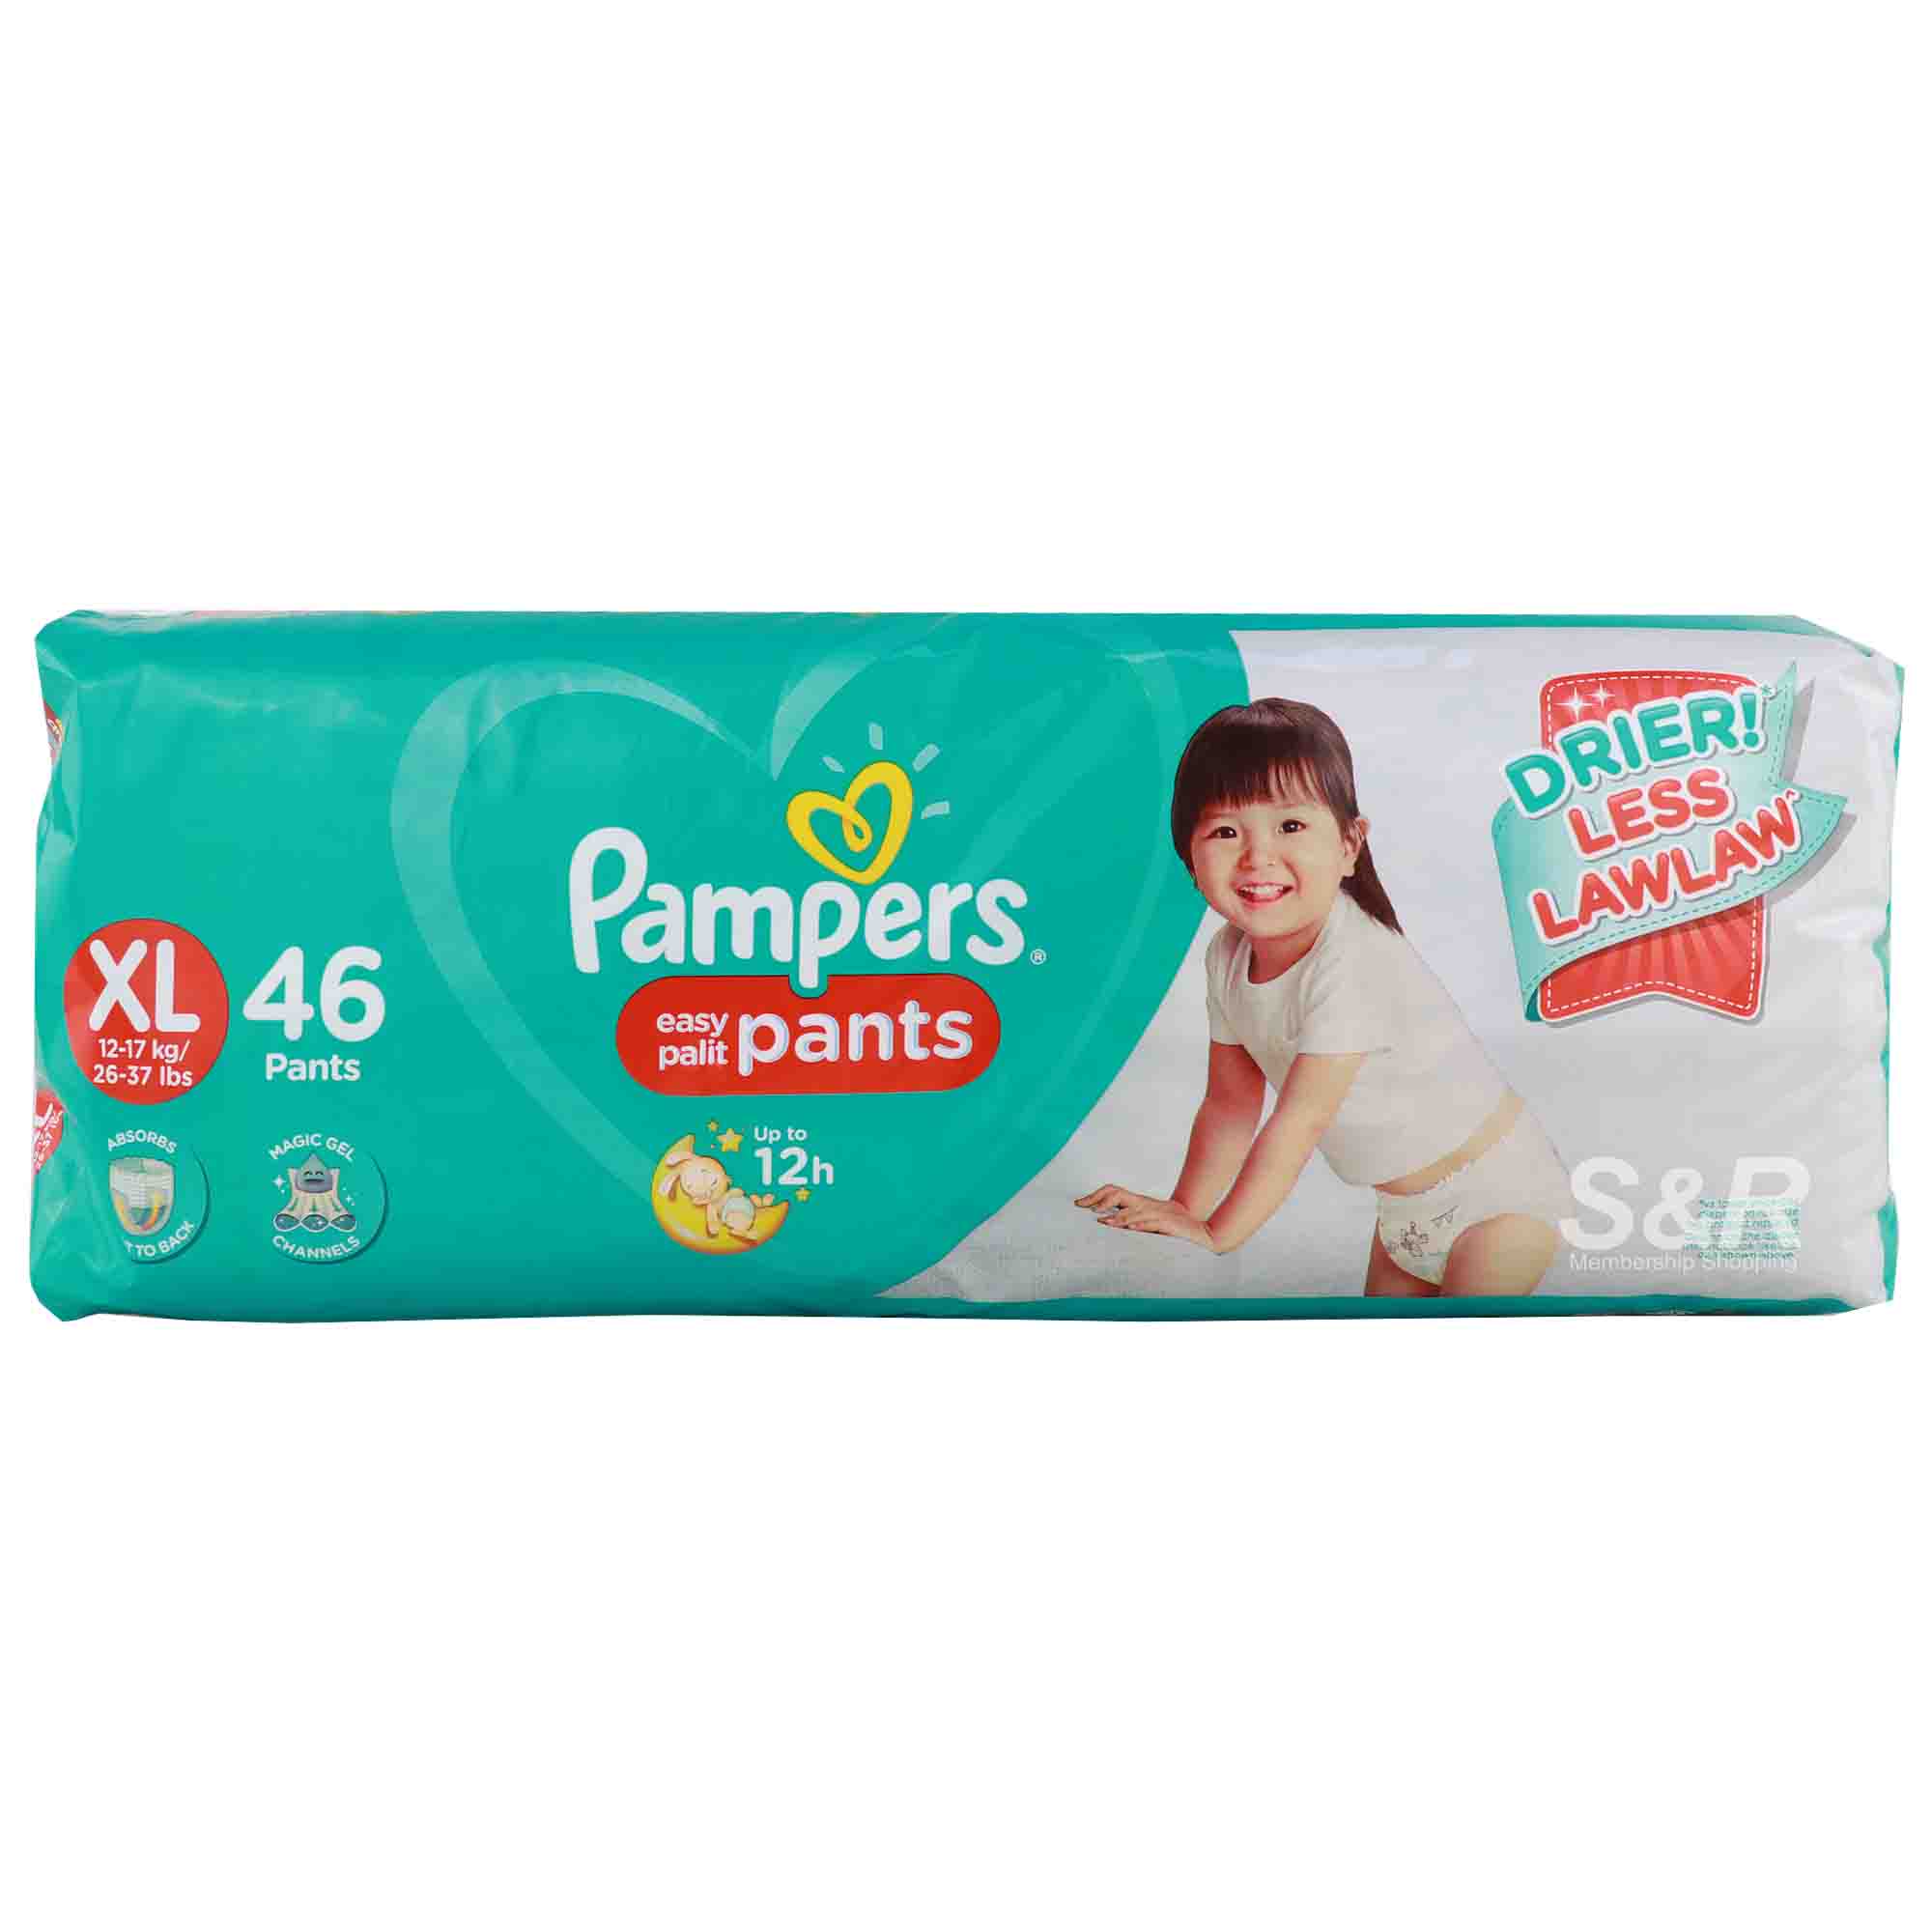 Pampers Diaper Pants, XL, 56 Count - Your new shopping destination